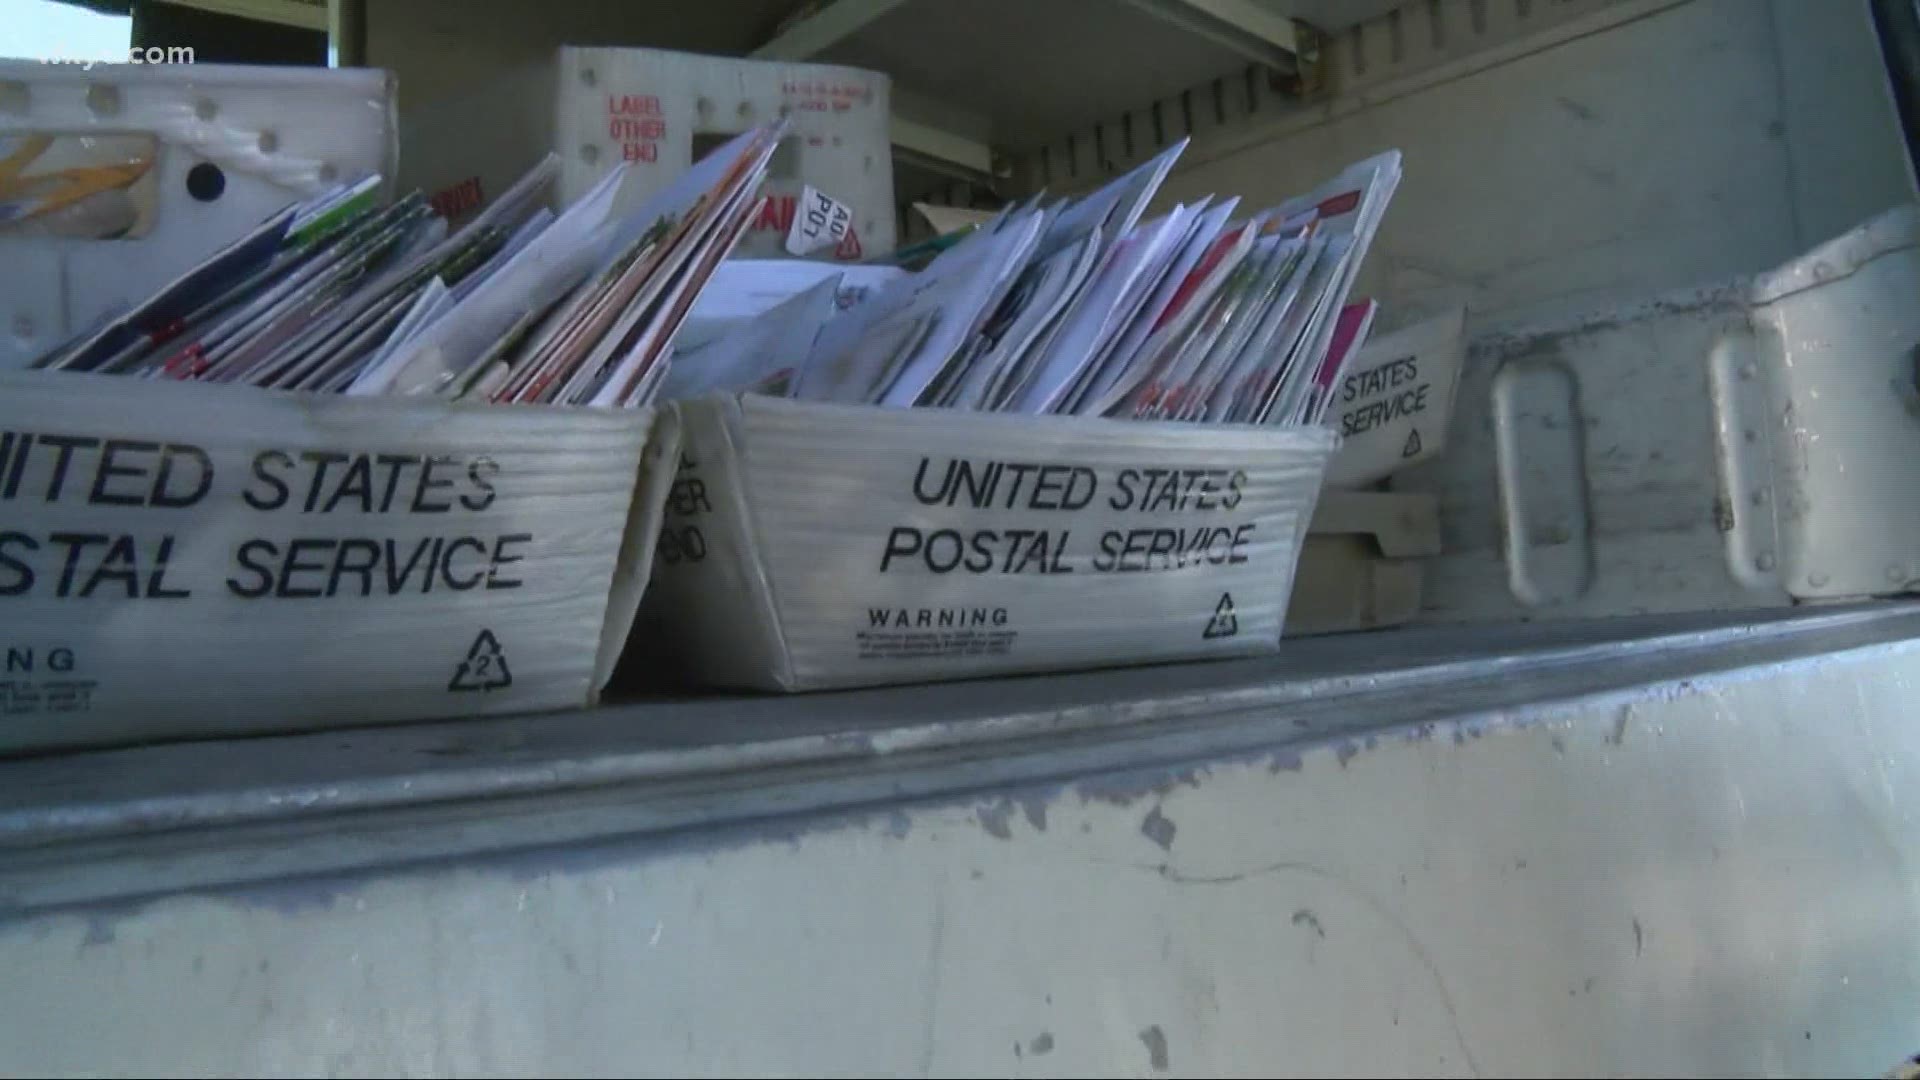 The delays come amid heavy demand and about one in four NE Ohio postal employees missing work due to COVID-19, union leaders say. Rachel Polansky reports.